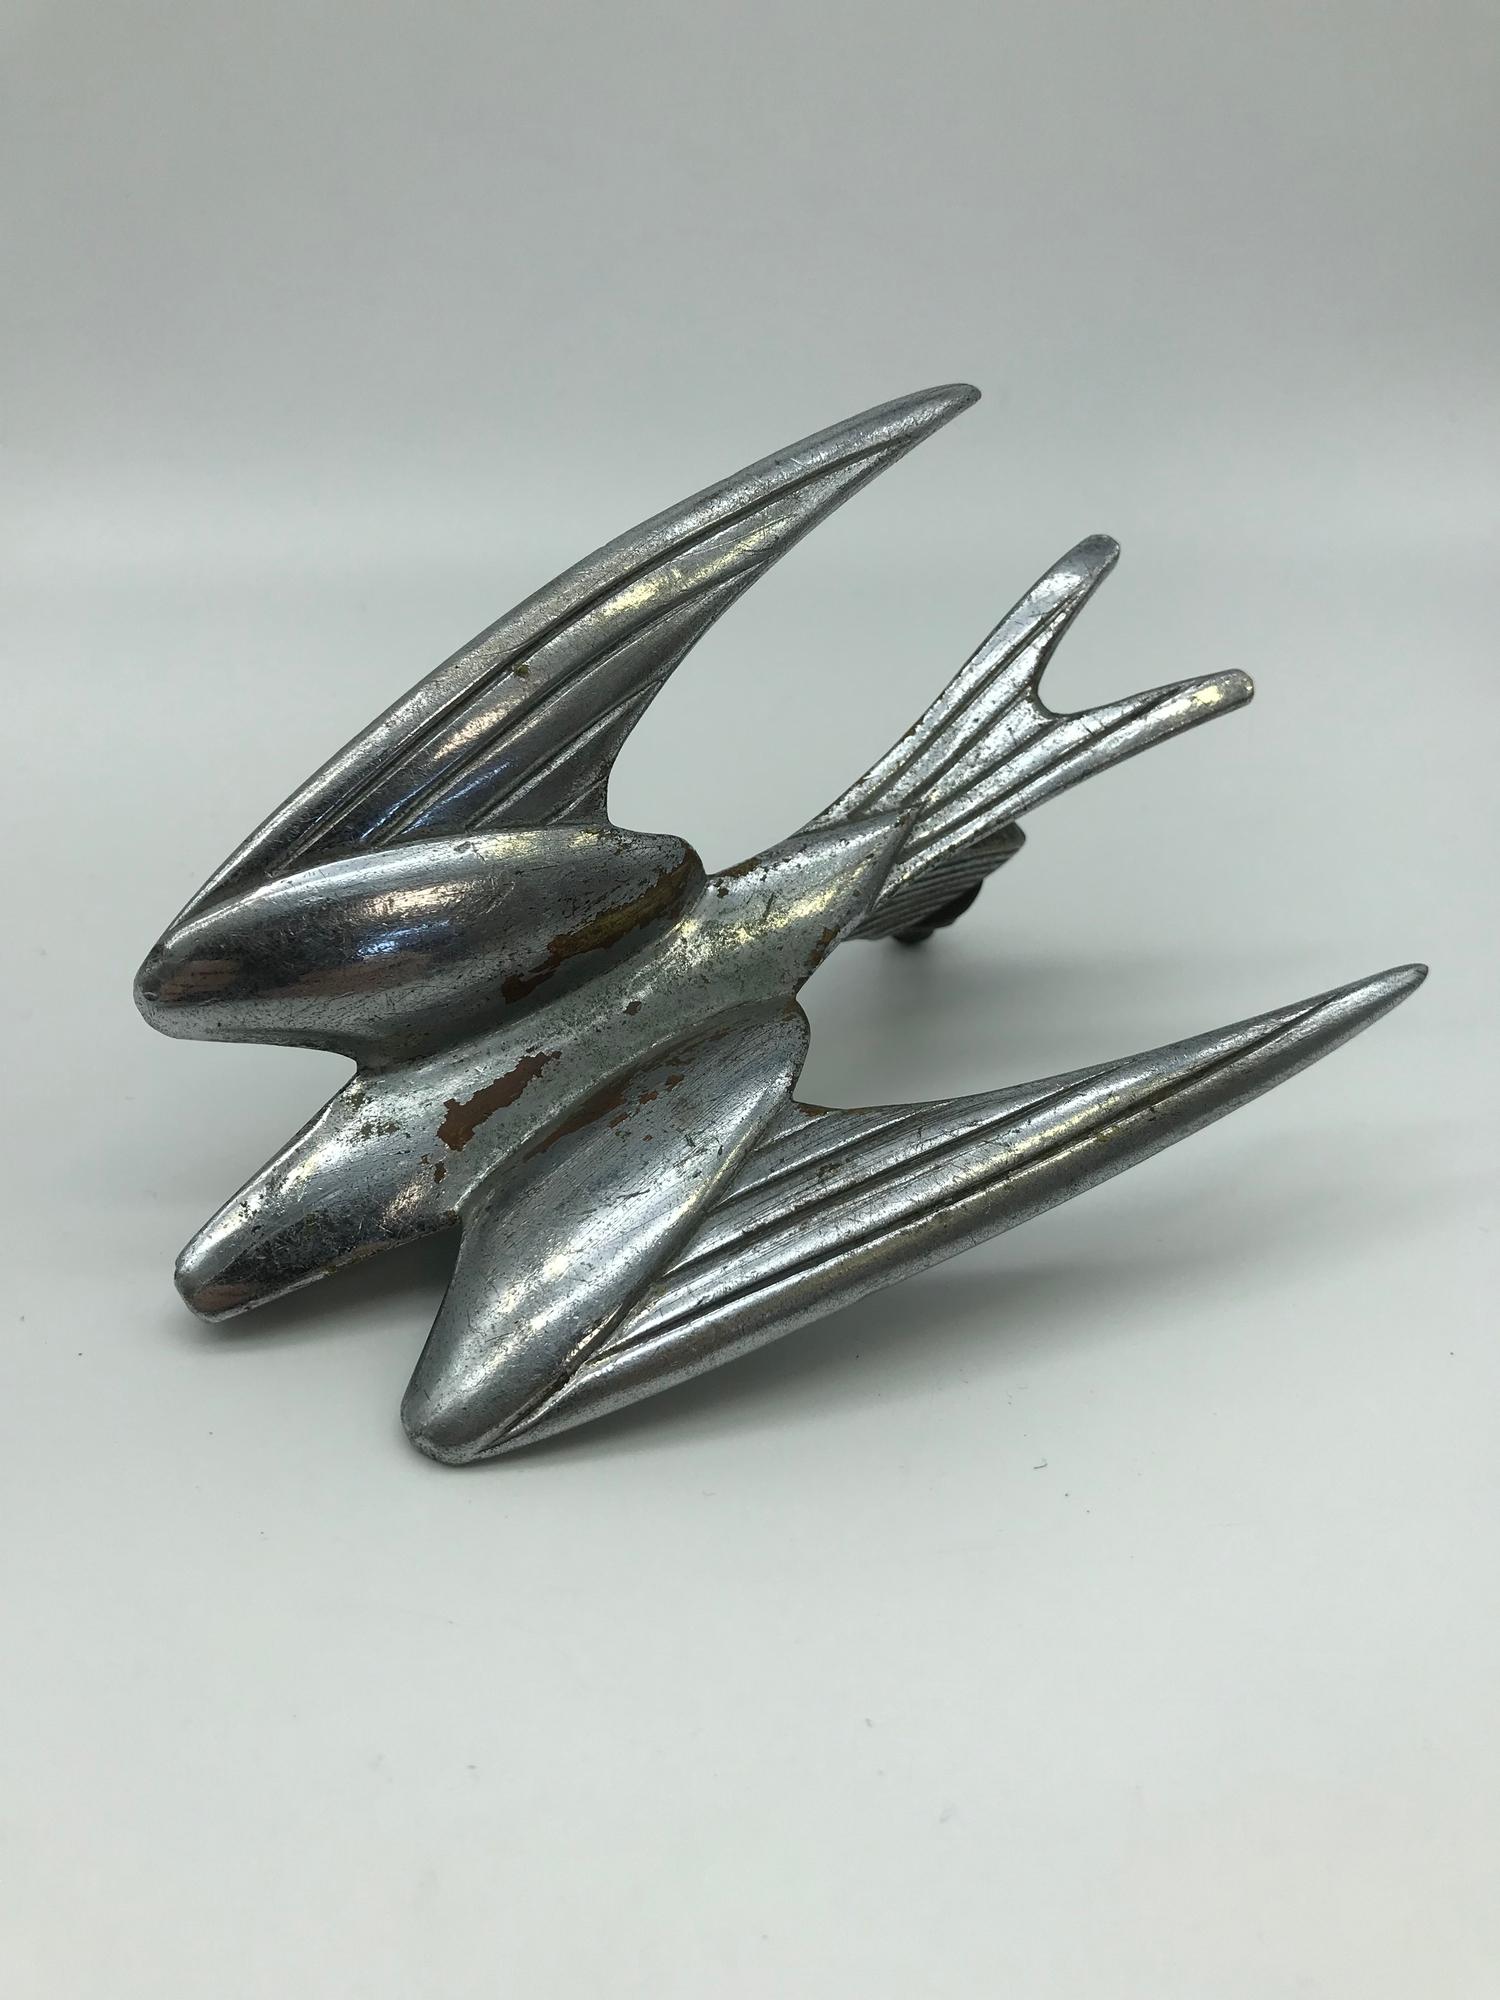 A 1930s Swift/ Swallow bird car mascot by Desmo. Measures 13cm in length.